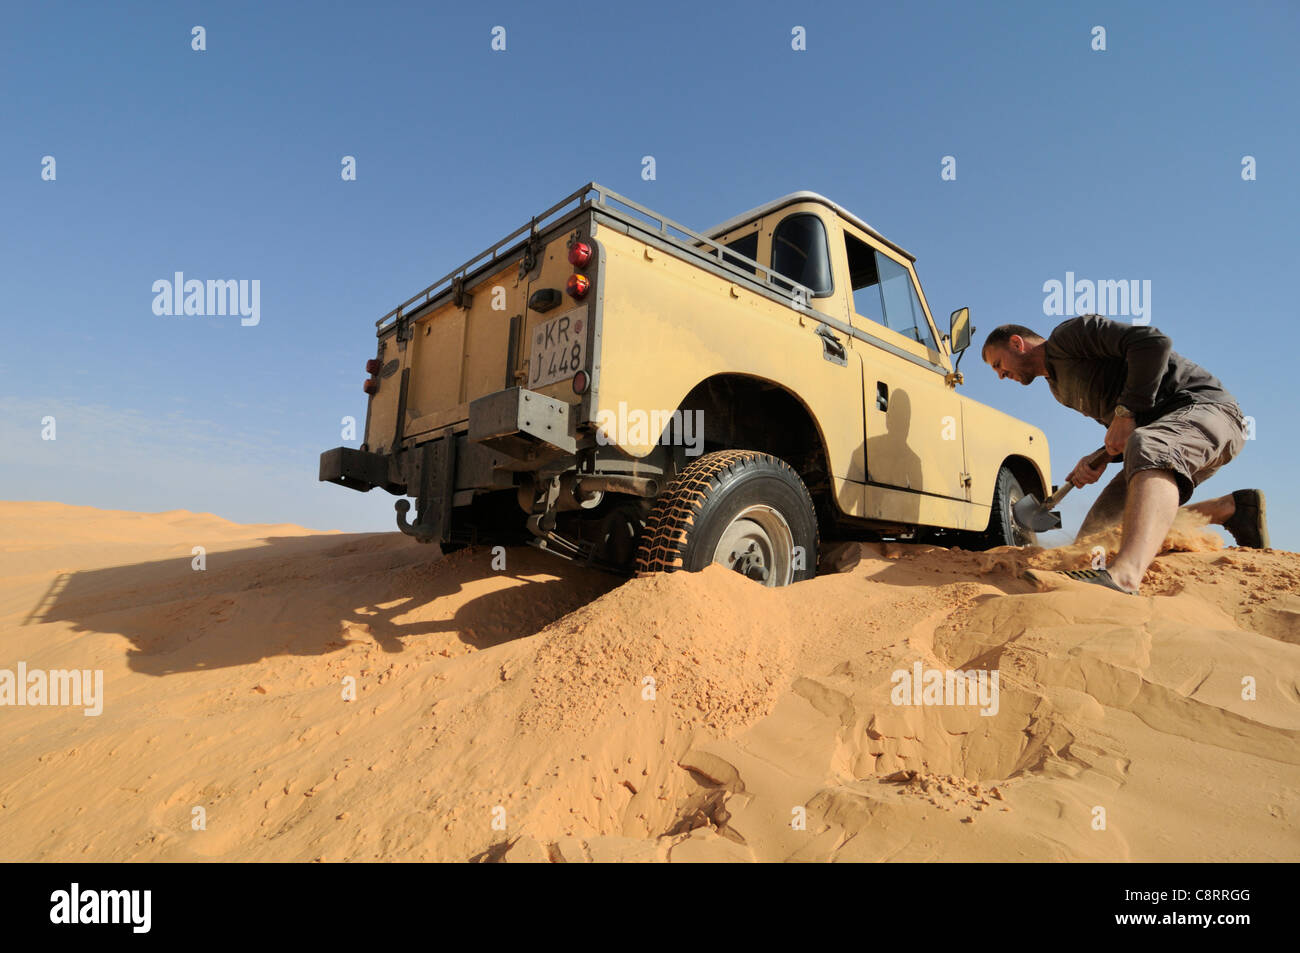 Africa, Tunisia, nr. Tembaine. Desert traveller got stuck with his 1964 Land Rover Series 2a Truck Cab while traversing sand ... Stock Photo